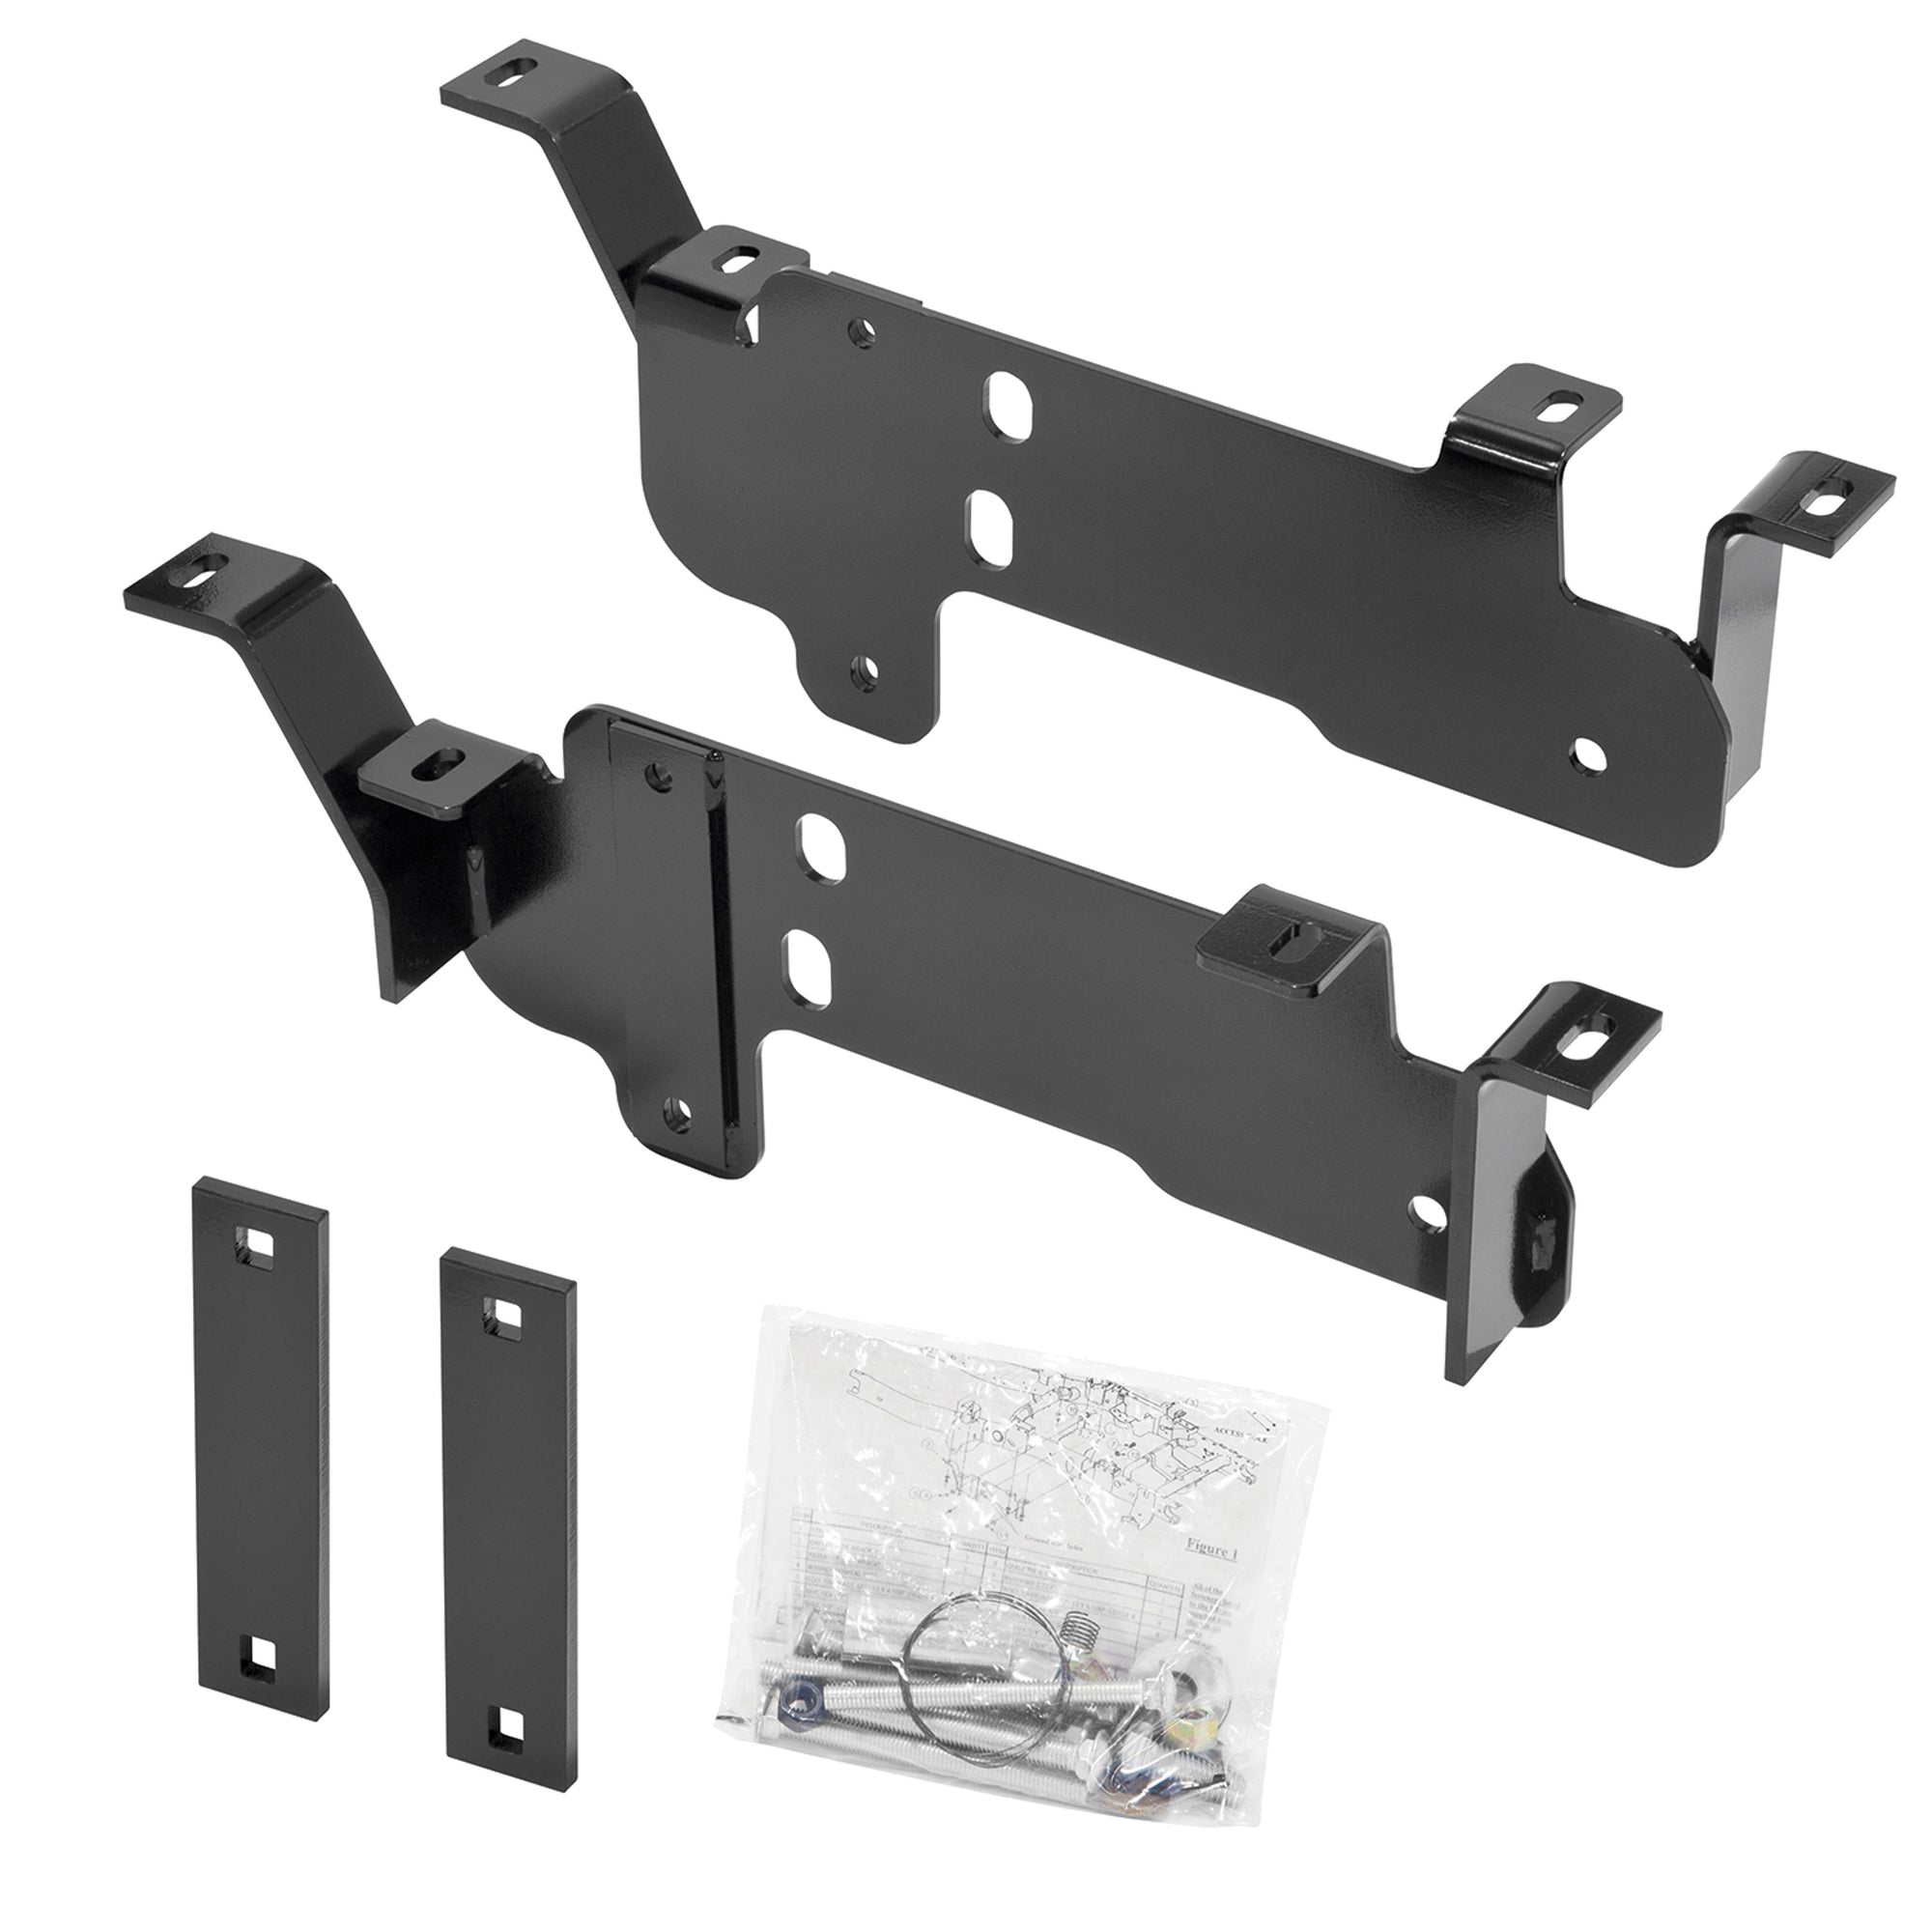 Reese 56010 Outboard Fifth Wheel Trailer Hitch Brackets Only for 2013-2020 RAM 3500 Trucks